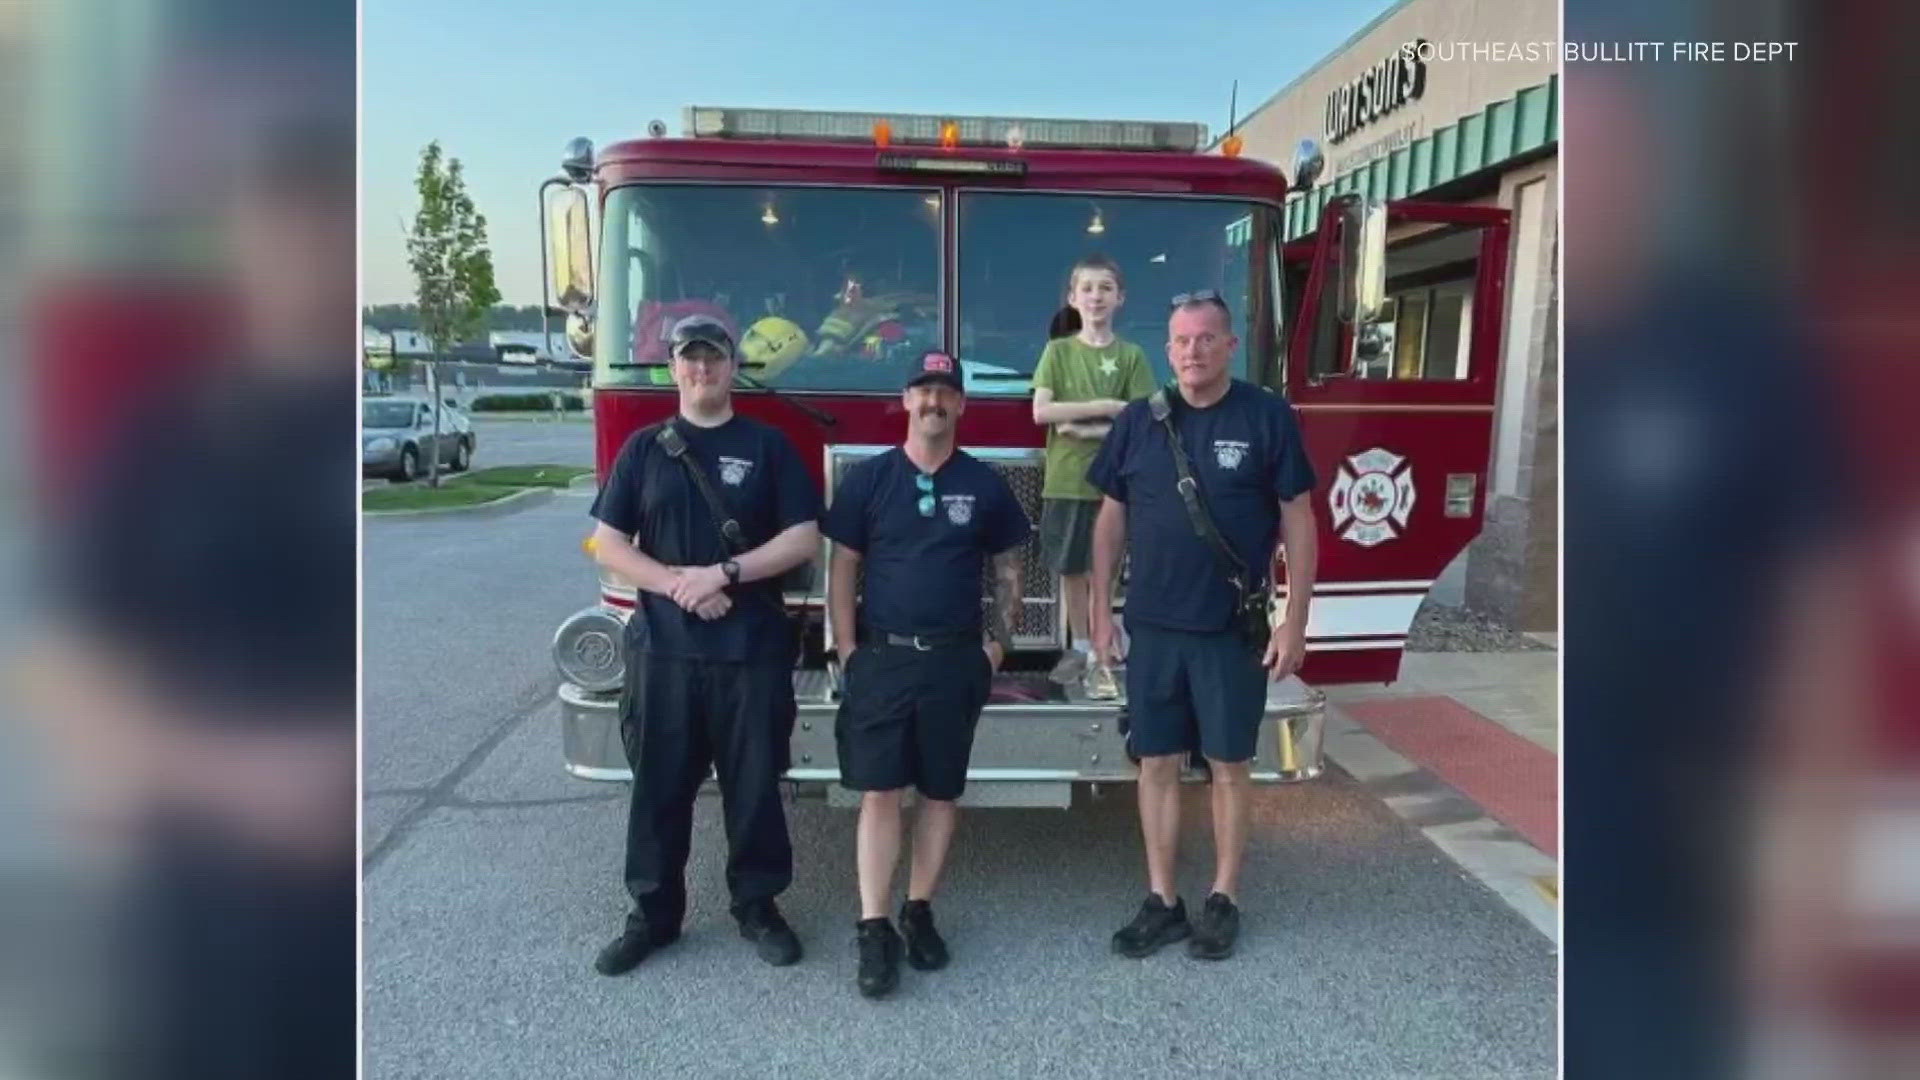 These three firefighters met Sammy on their dinner break last night while his family traveled from North Carolina.